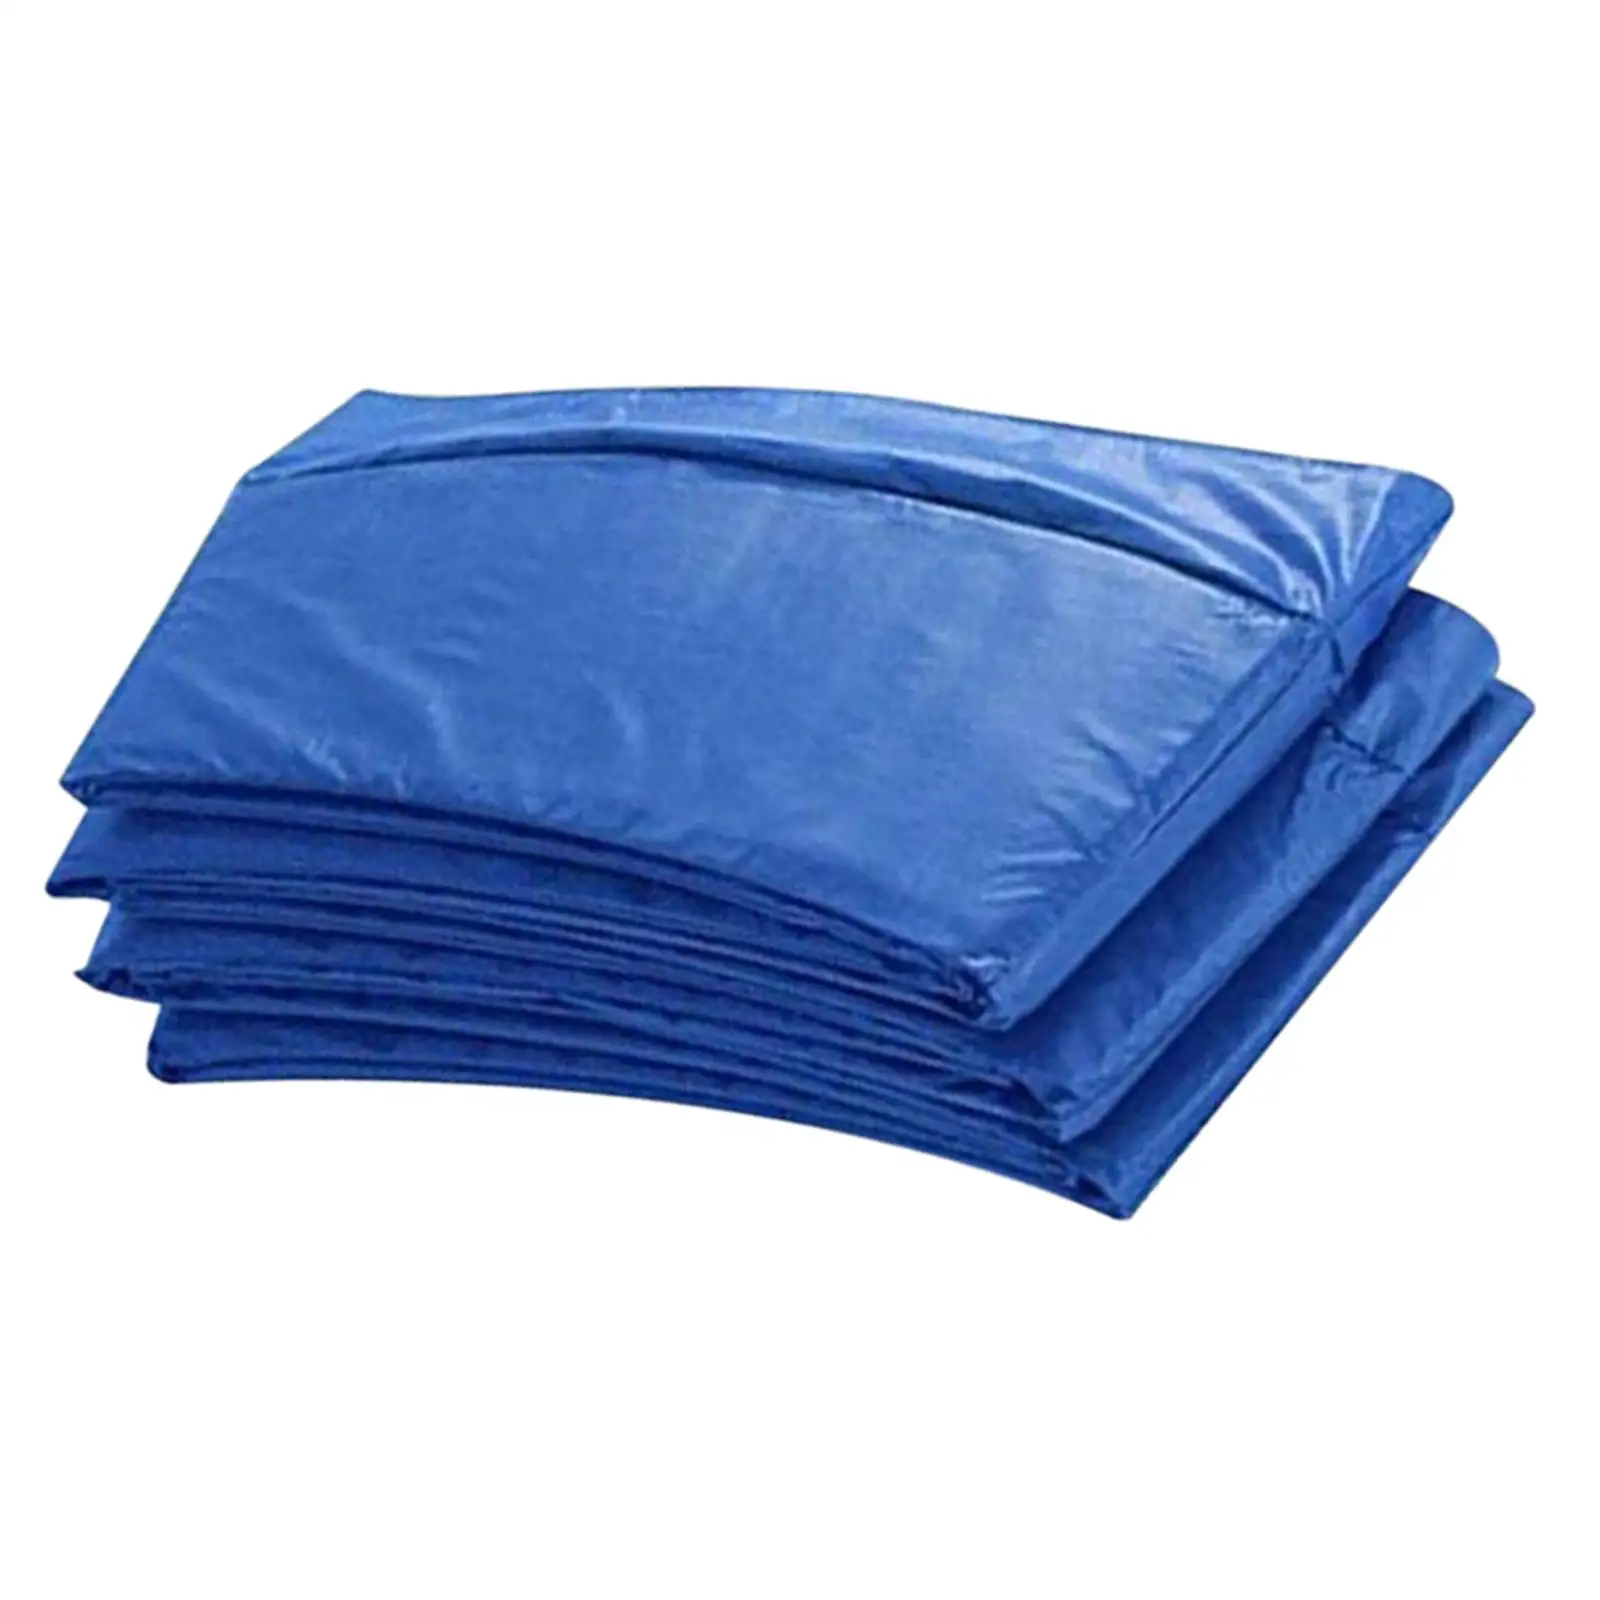 Trampoline Safety Pad Mat Trampoline Accessories Easy Install Spring Cover